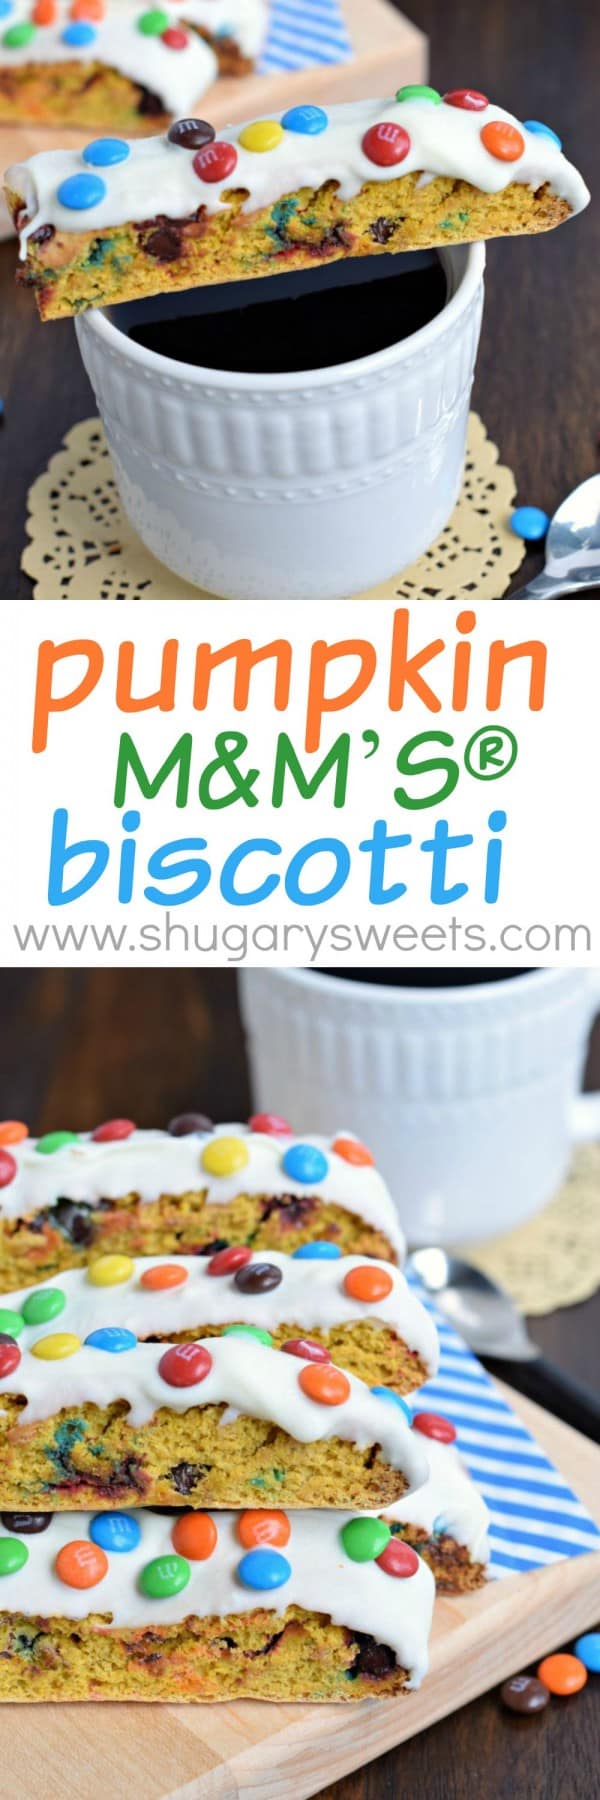 Looking for a fall snack idea? This Pumpkin M&M’S® Biscotti has the perfect crunch and tastes amazing dunked in your coffee or hot cocoa!